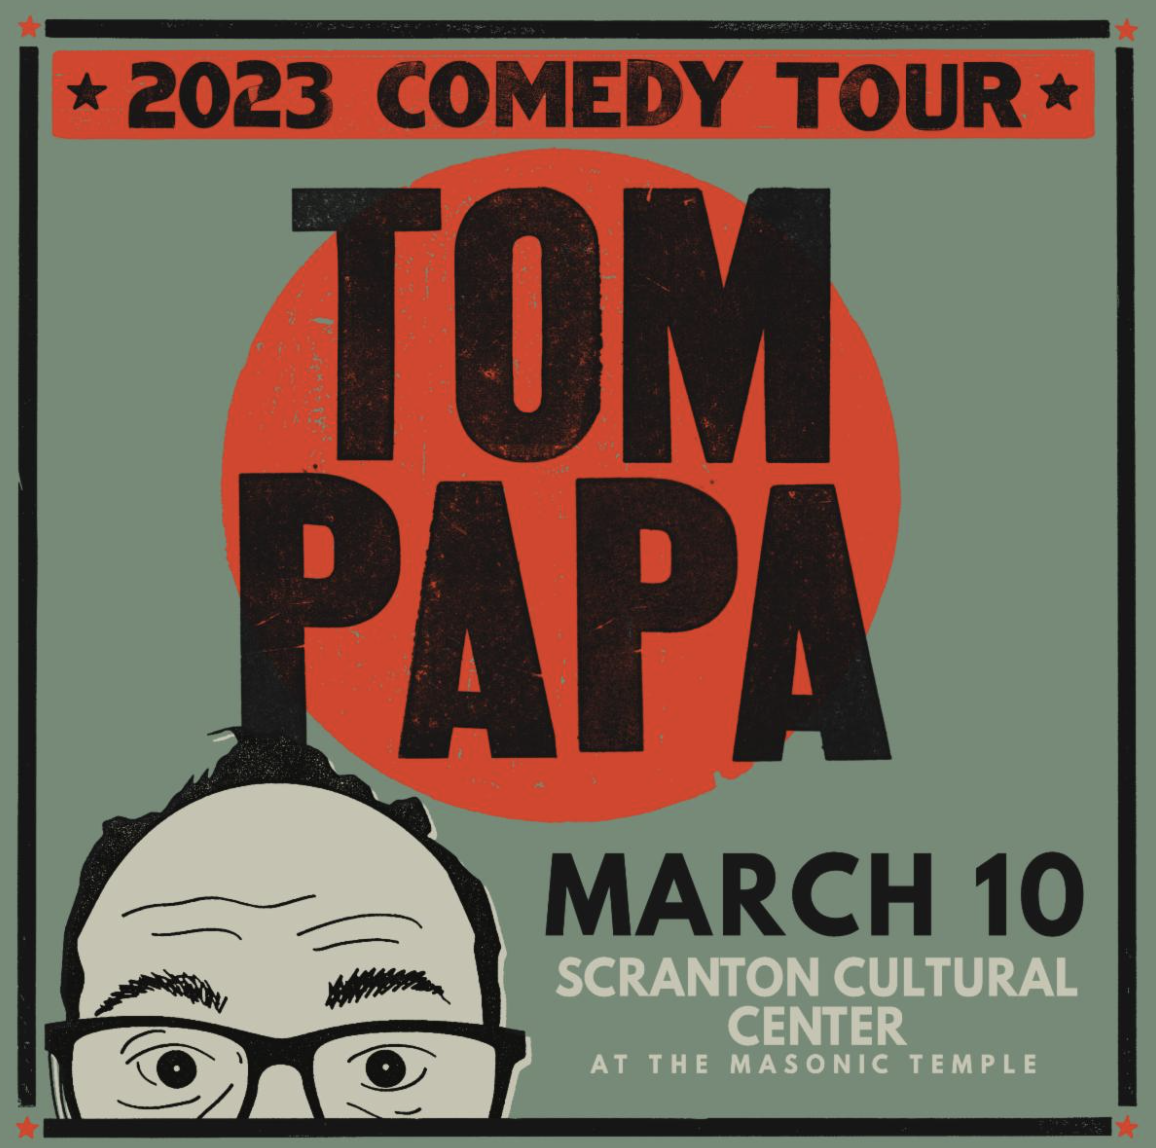 Philly loves Tom Papa - See Him LIVE at The Scranton Cultural Center March 10